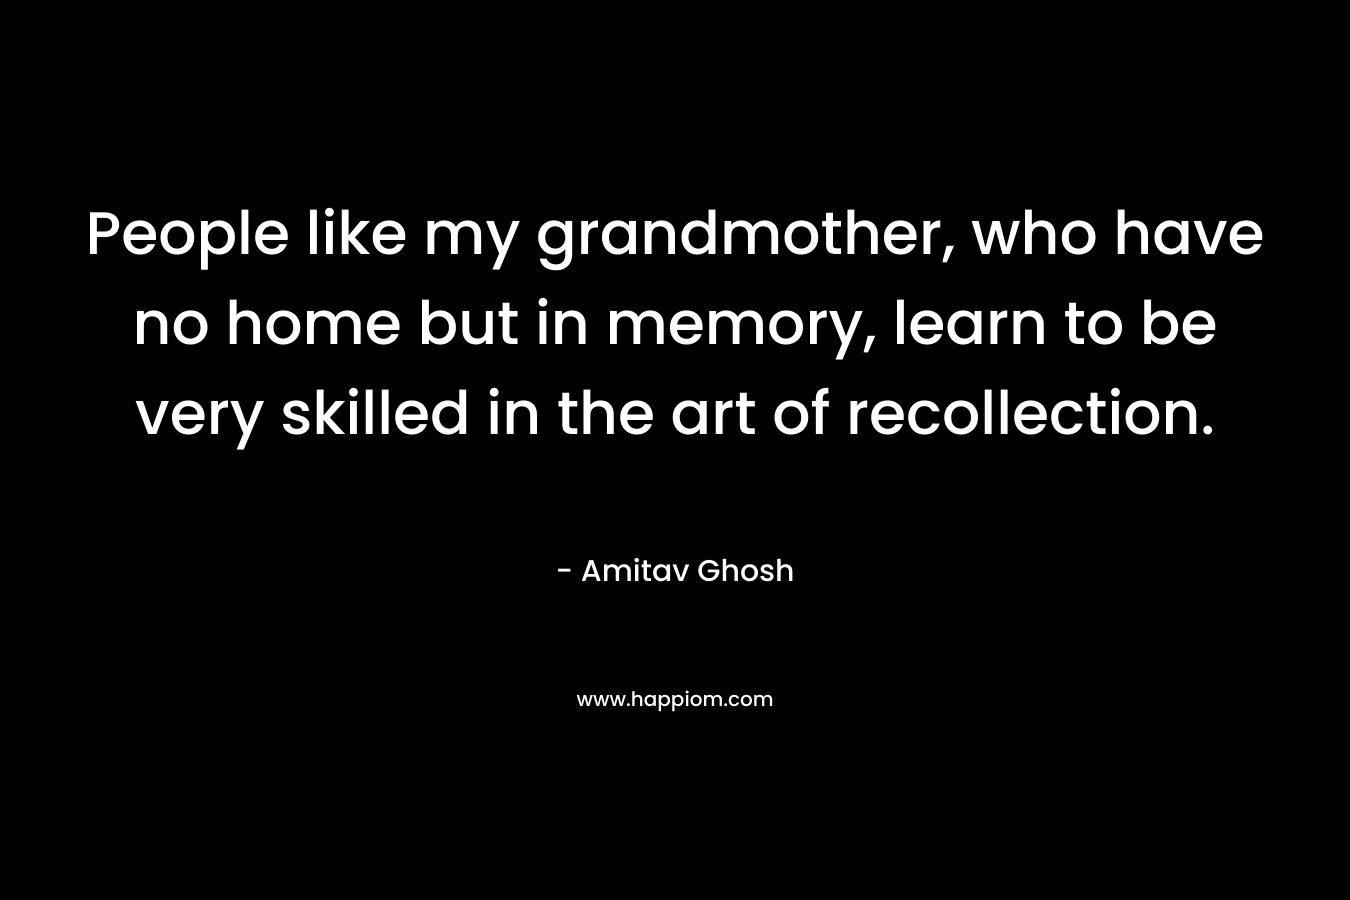 People like my grandmother, who have no home but in memory, learn to be very skilled in the art of recollection.